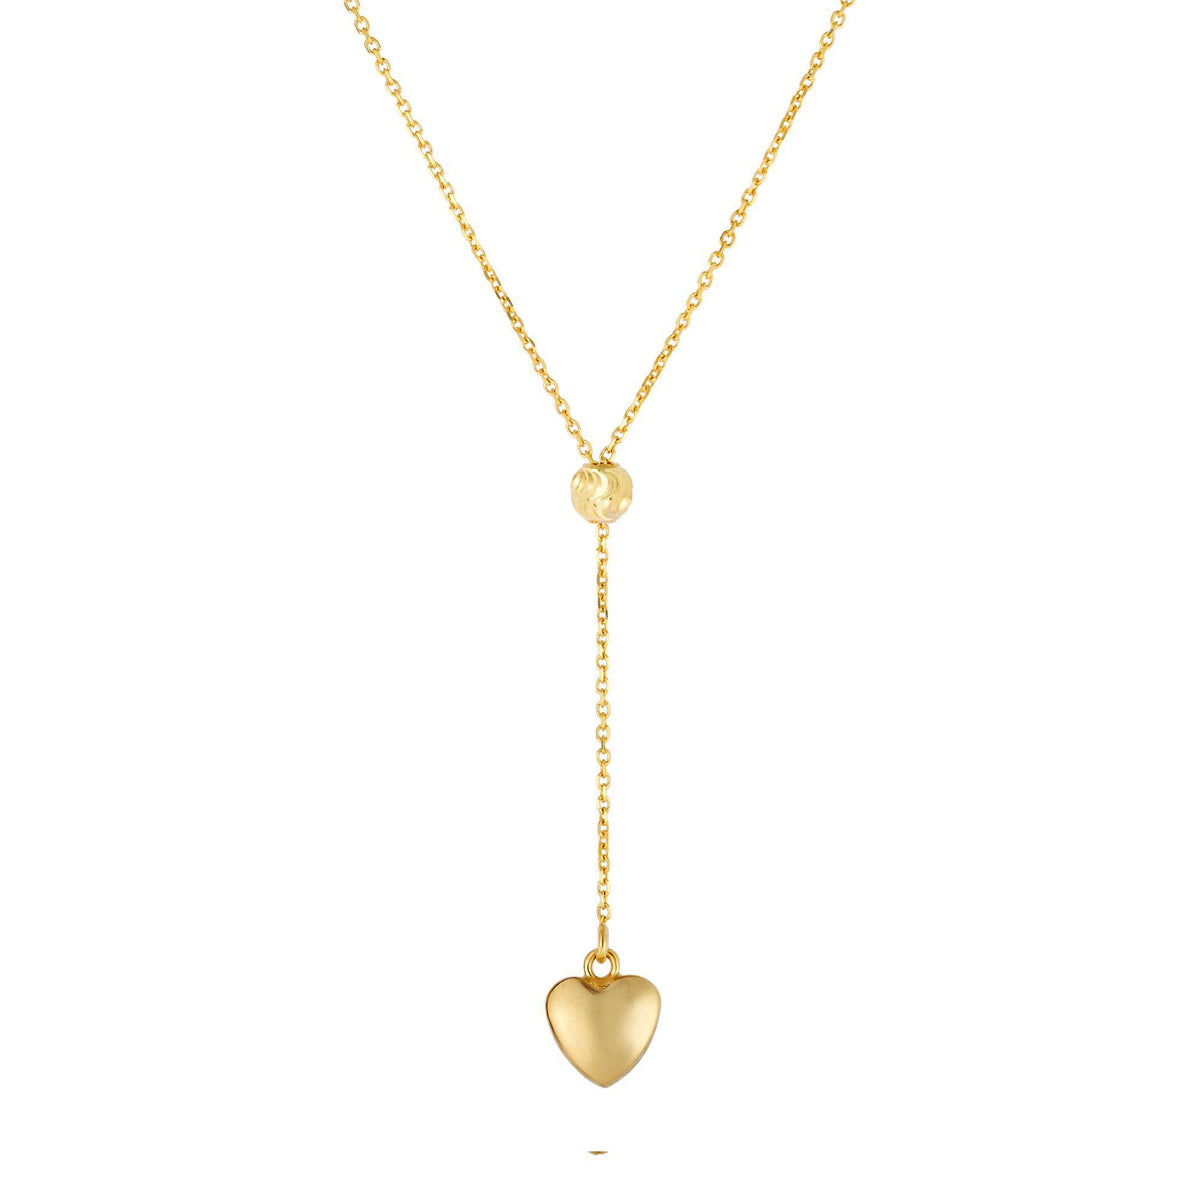 14k Yellow Gold Hanging Heart Necklace, 18" fine designer jewelry for men and women